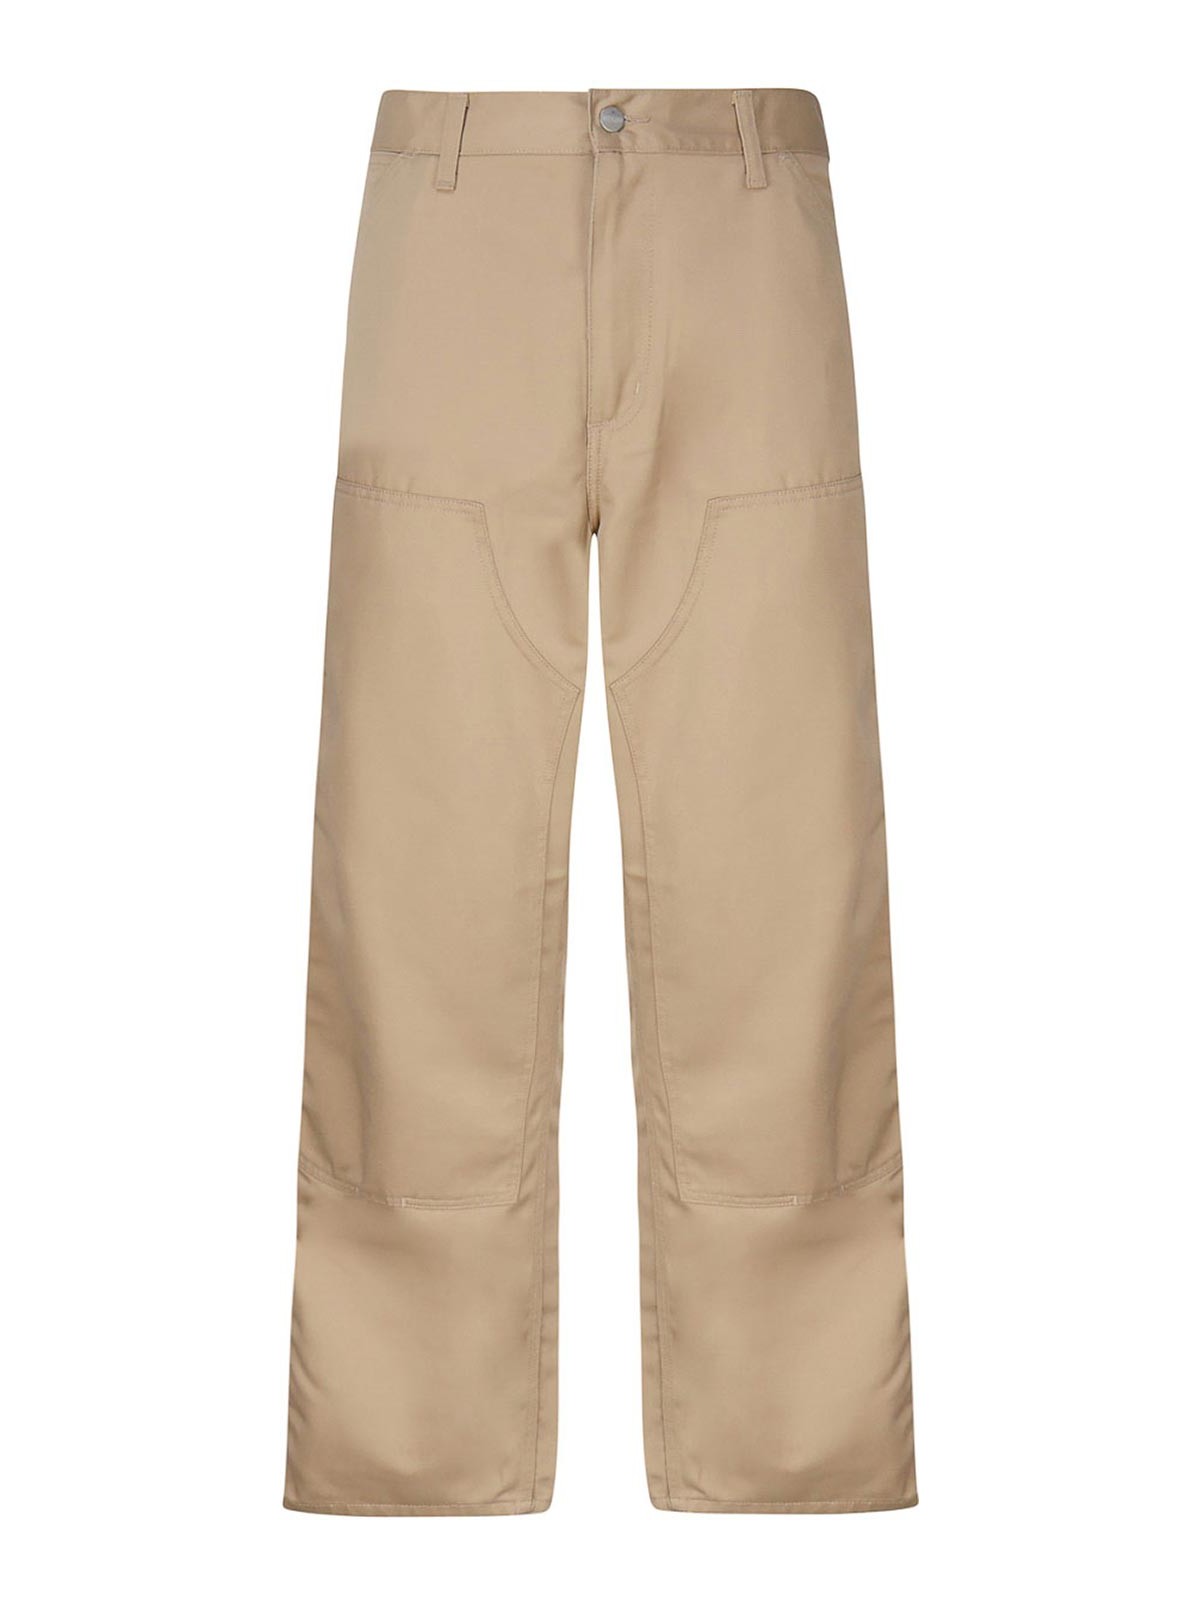 Carhartt Trousers With Knee Detail In Beige